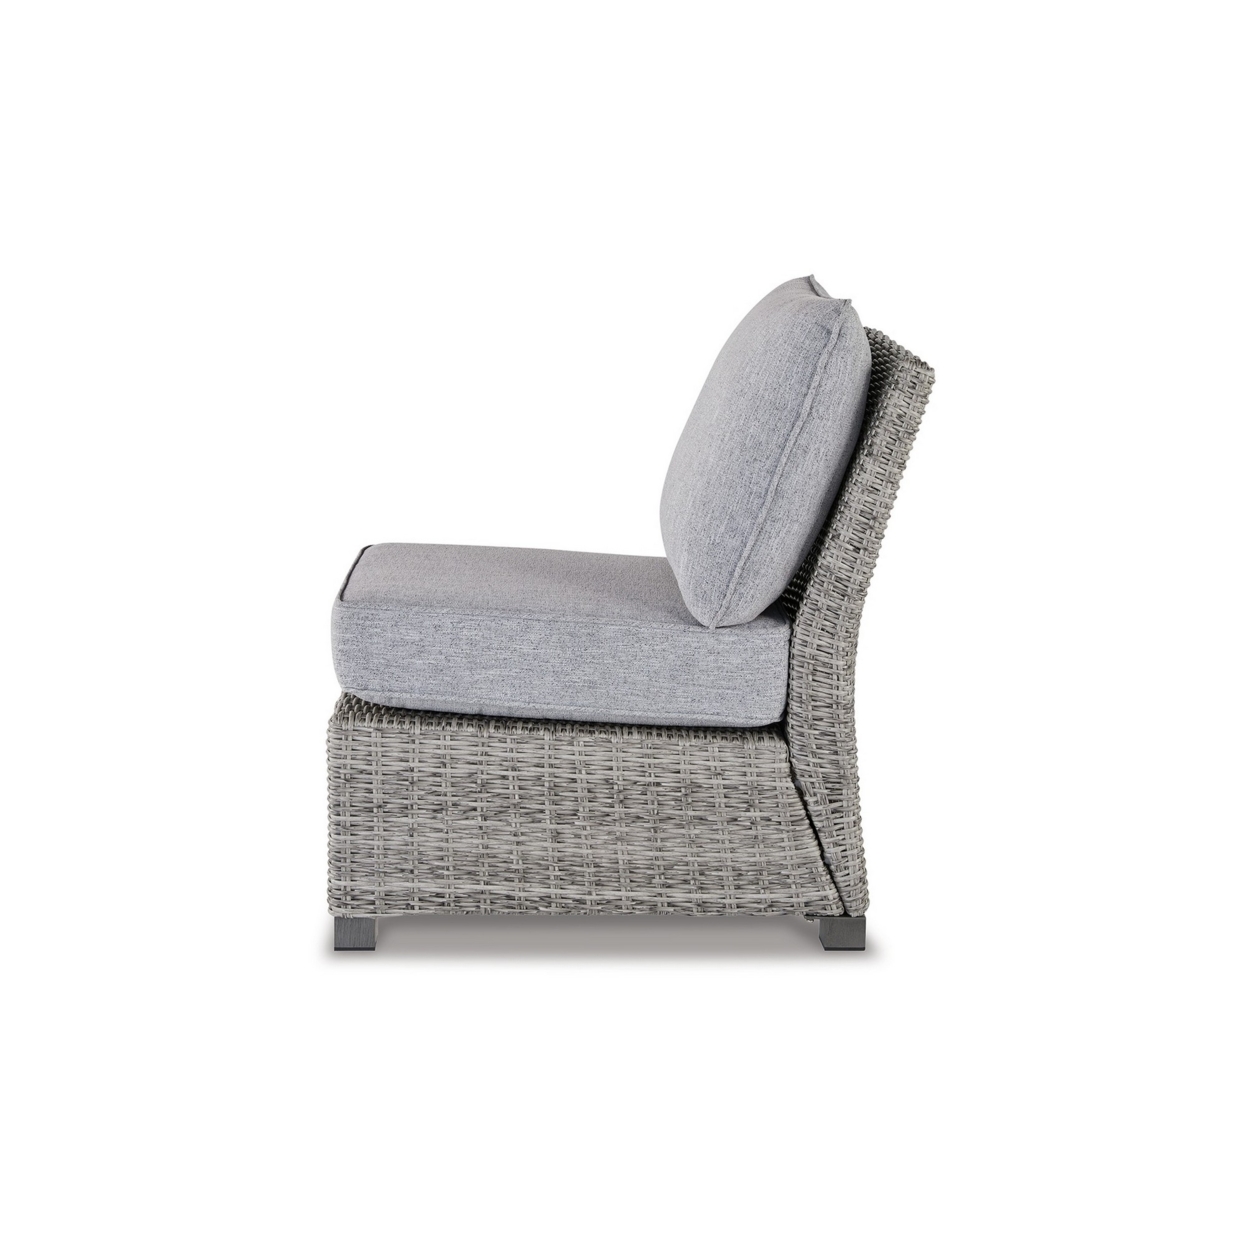 24 Inch Outdoor Accent Chair, Gray Cushions And All Weather Resin Wicker- Saltoro Sherpi